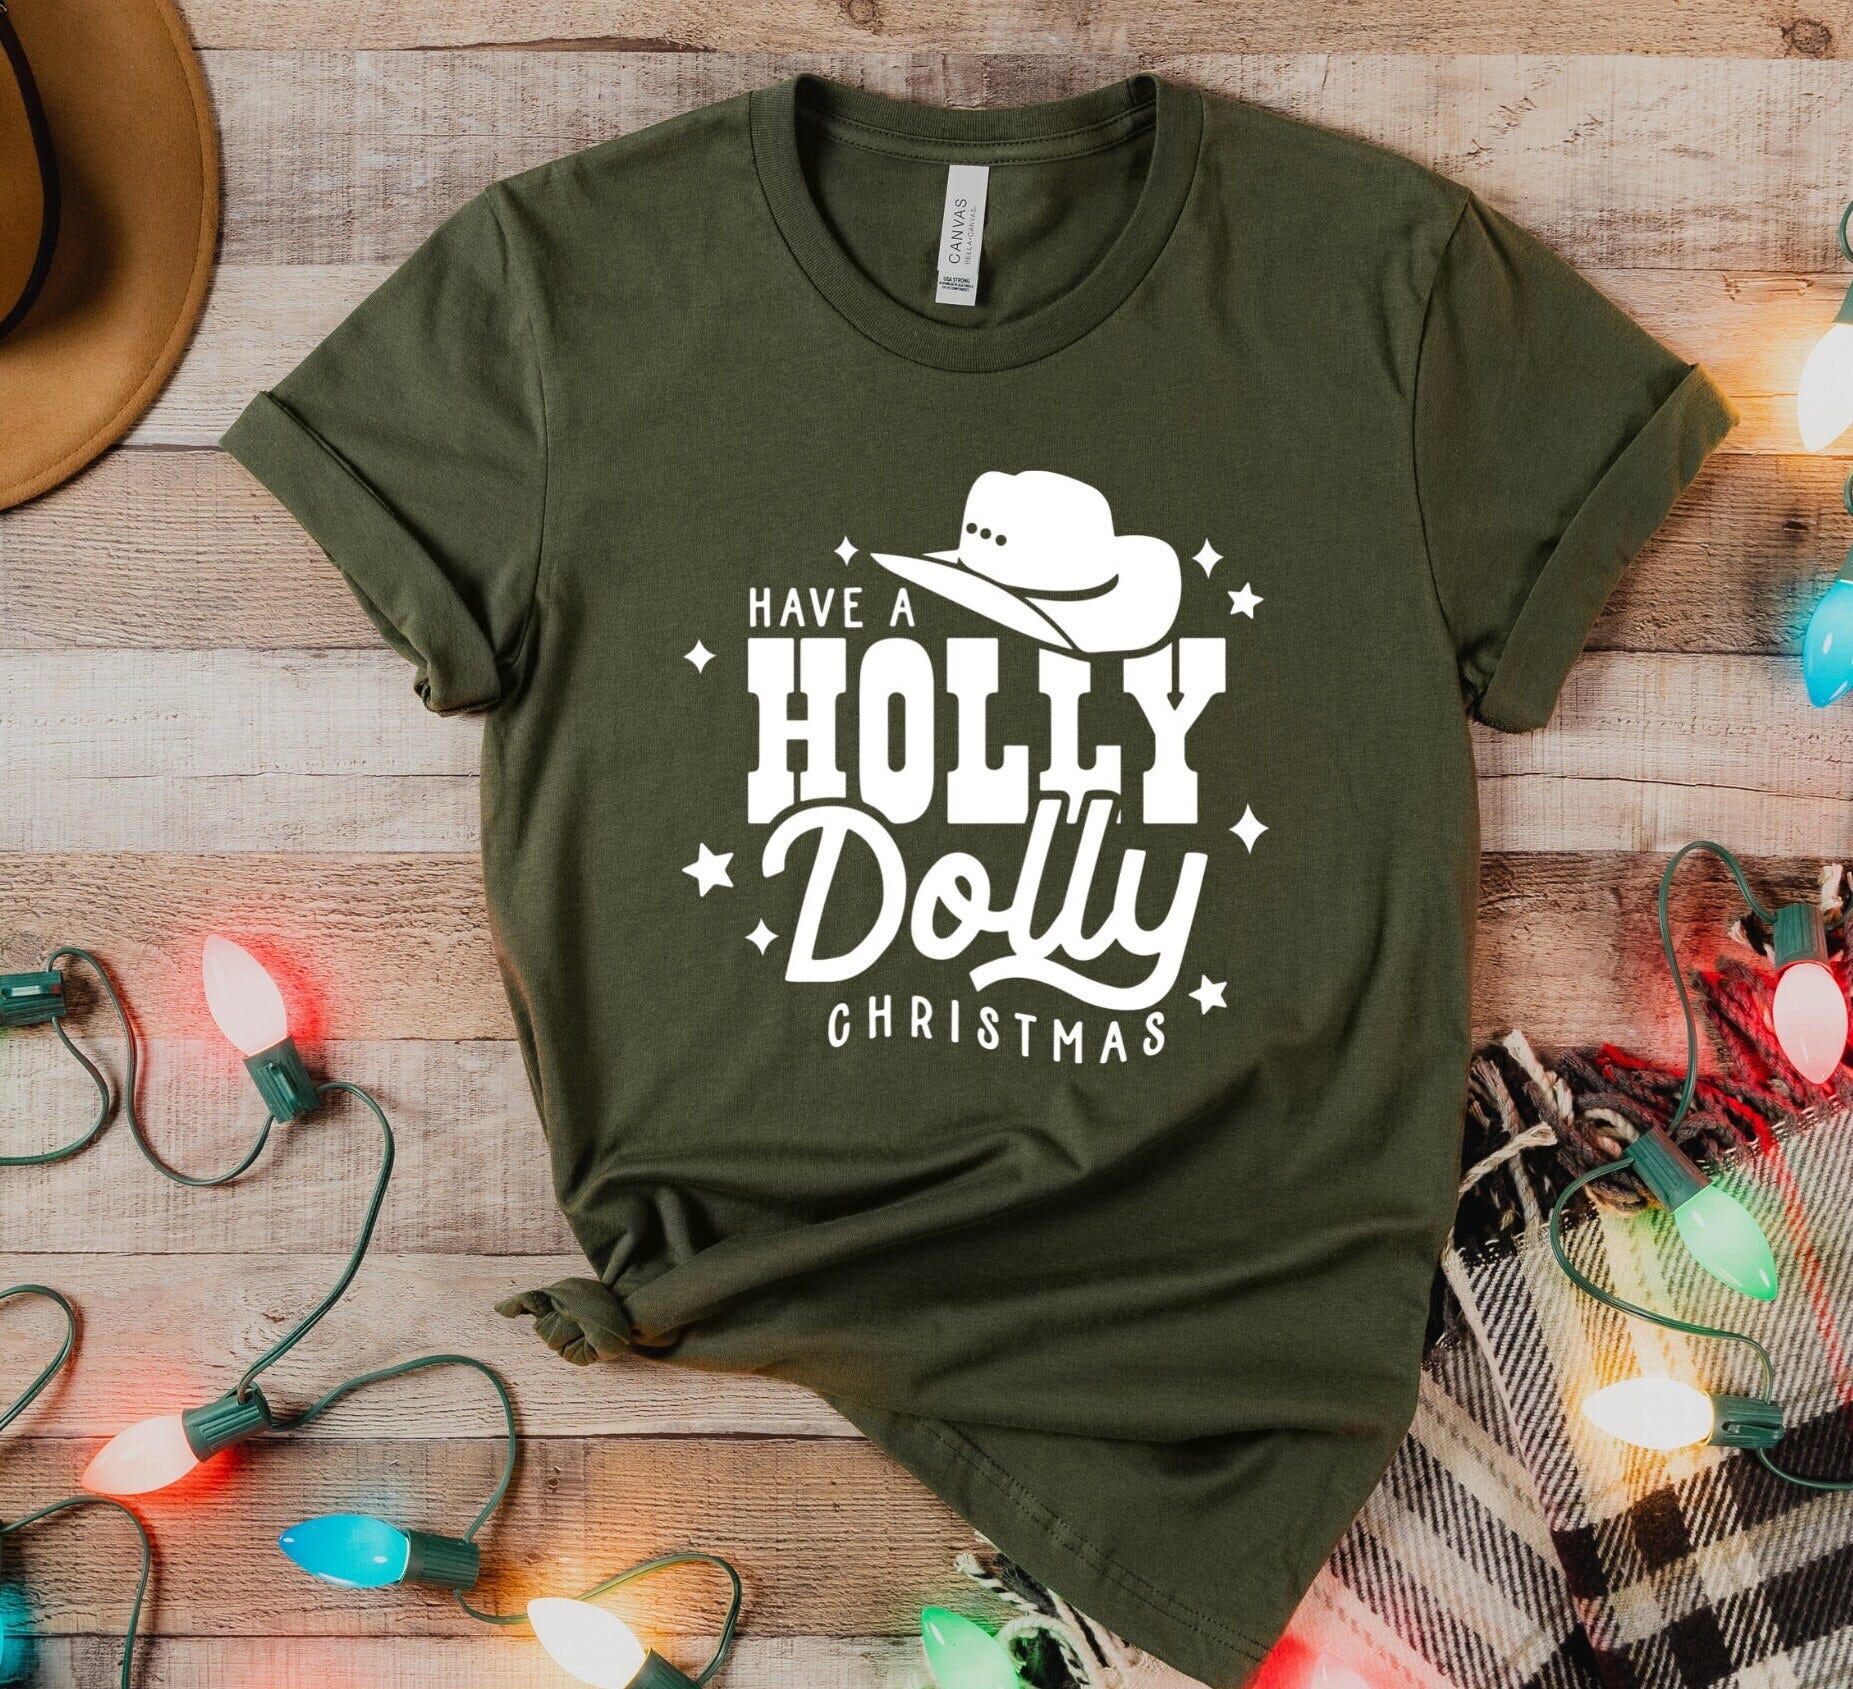 Have a Holly Dolly Christmas, Funny Christmas Shirt, Disco Cowgirl, Space Cowgirl, Christmas Sweater, Christmas Tee, Best Friend Gift